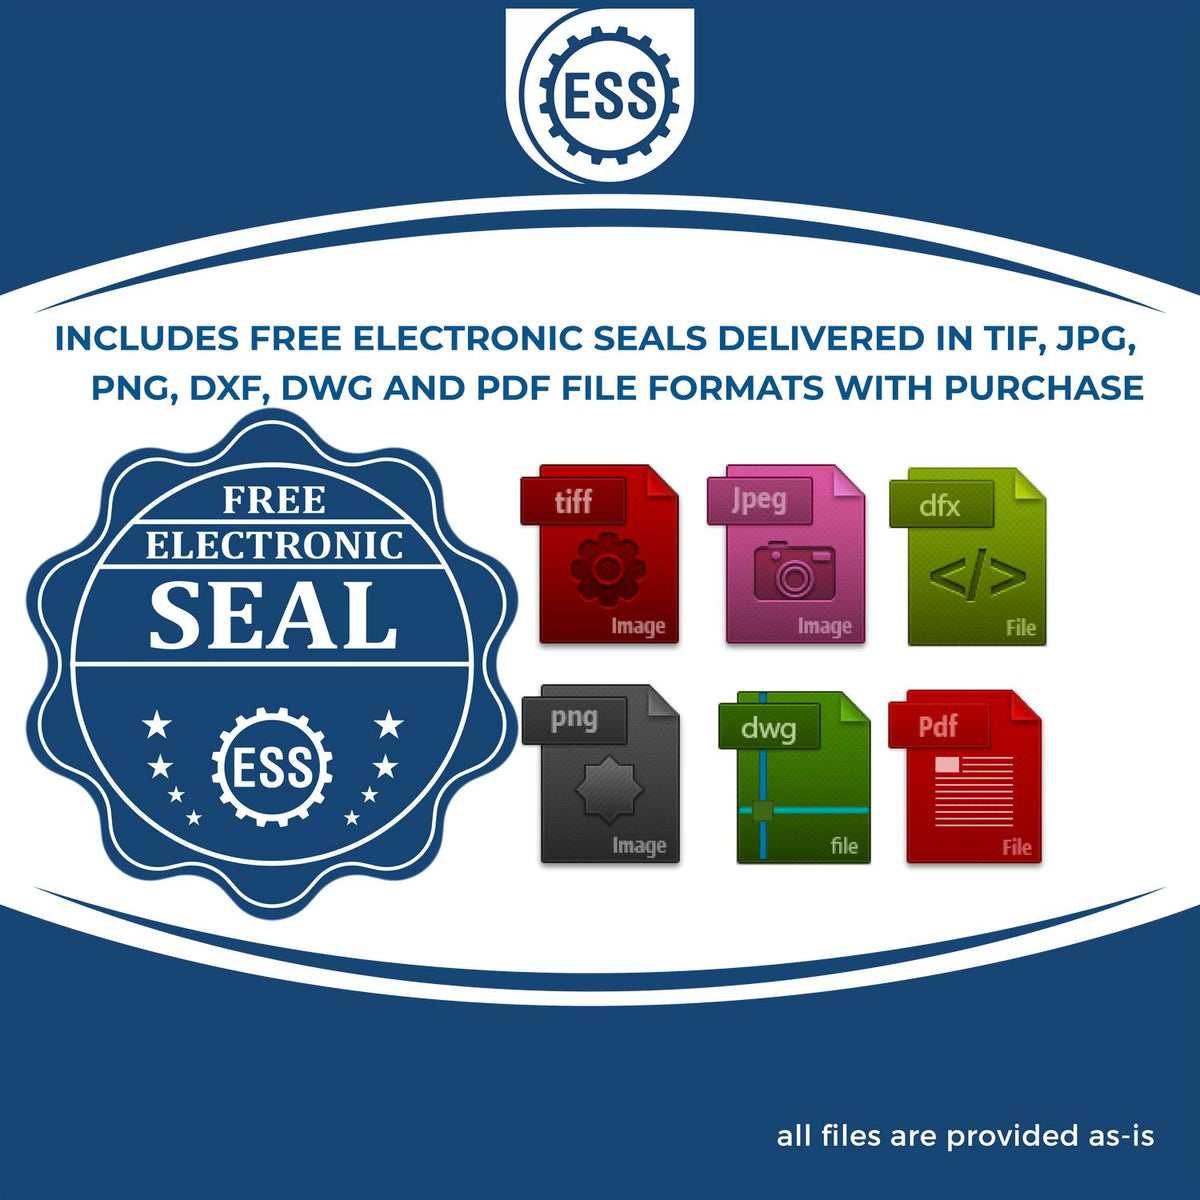 An infographic for the free electronic seal for the South Dakota Engineer Desk Seal illustrating the different file type icons such as DXF, DWG, TIF, JPG and PNG.